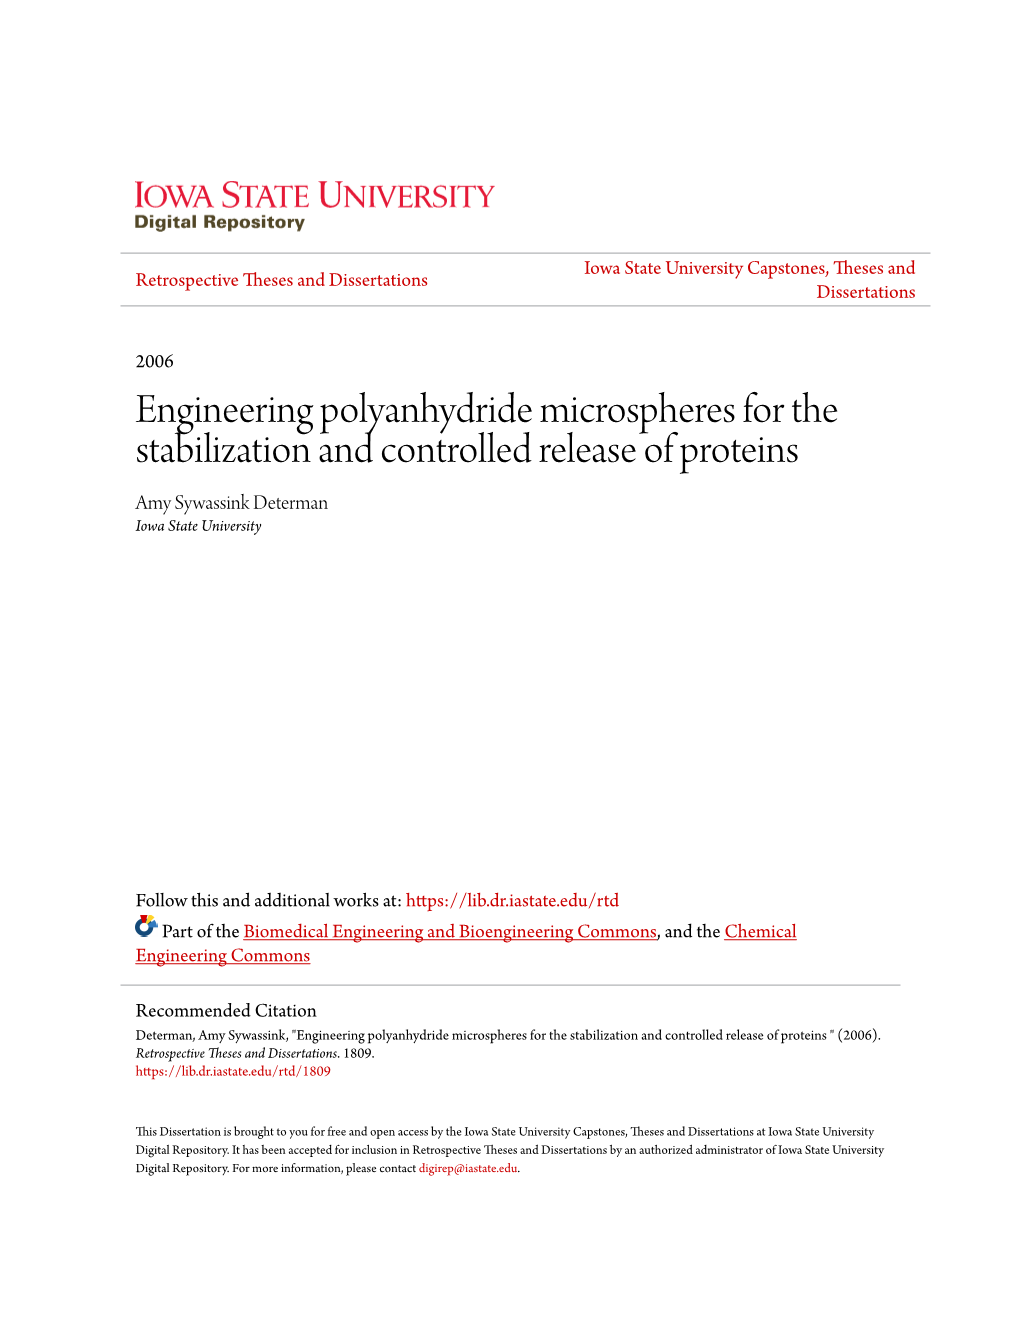 Engineering Polyanhydride Microspheres for the Stabilization and Controlled Release of Proteins Amy Sywassink Determan Iowa State University